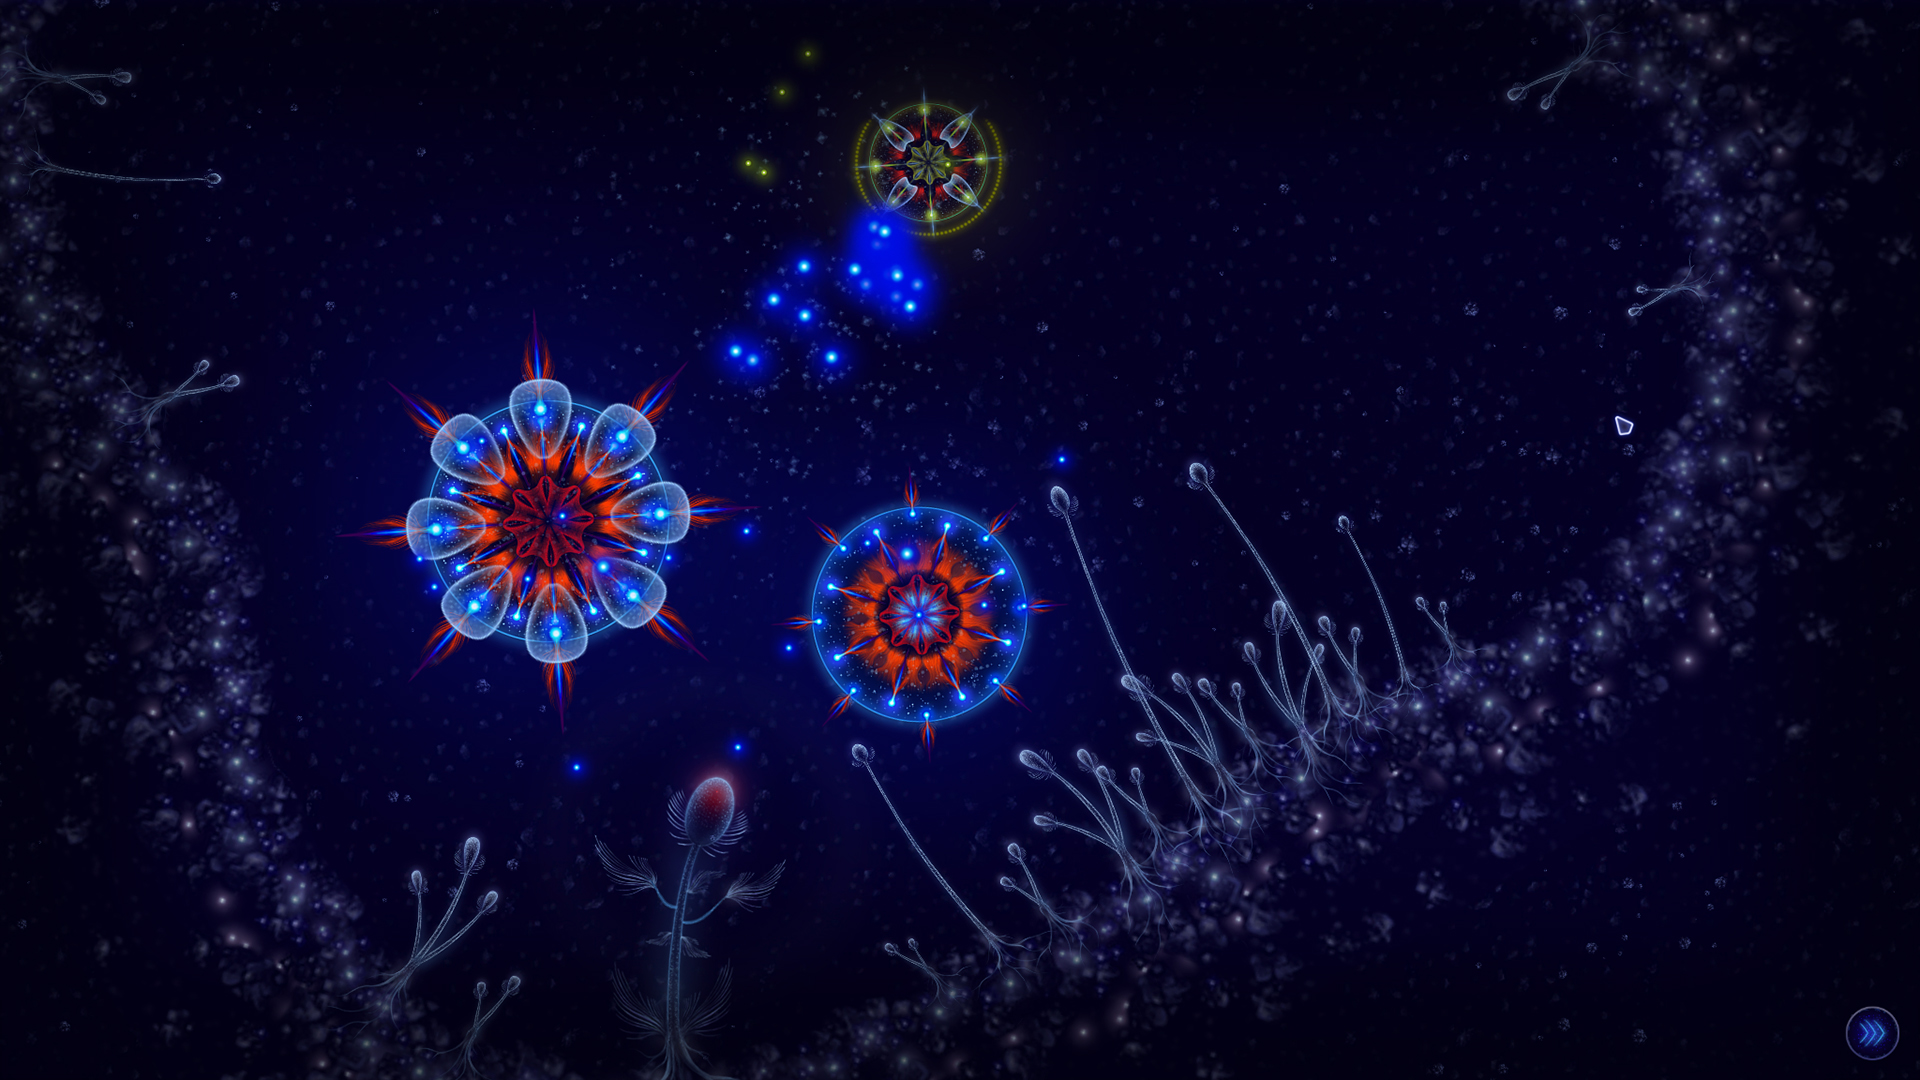 Microcosmum: survival of cells - Campaign "Mutations" Featured Screenshot #1